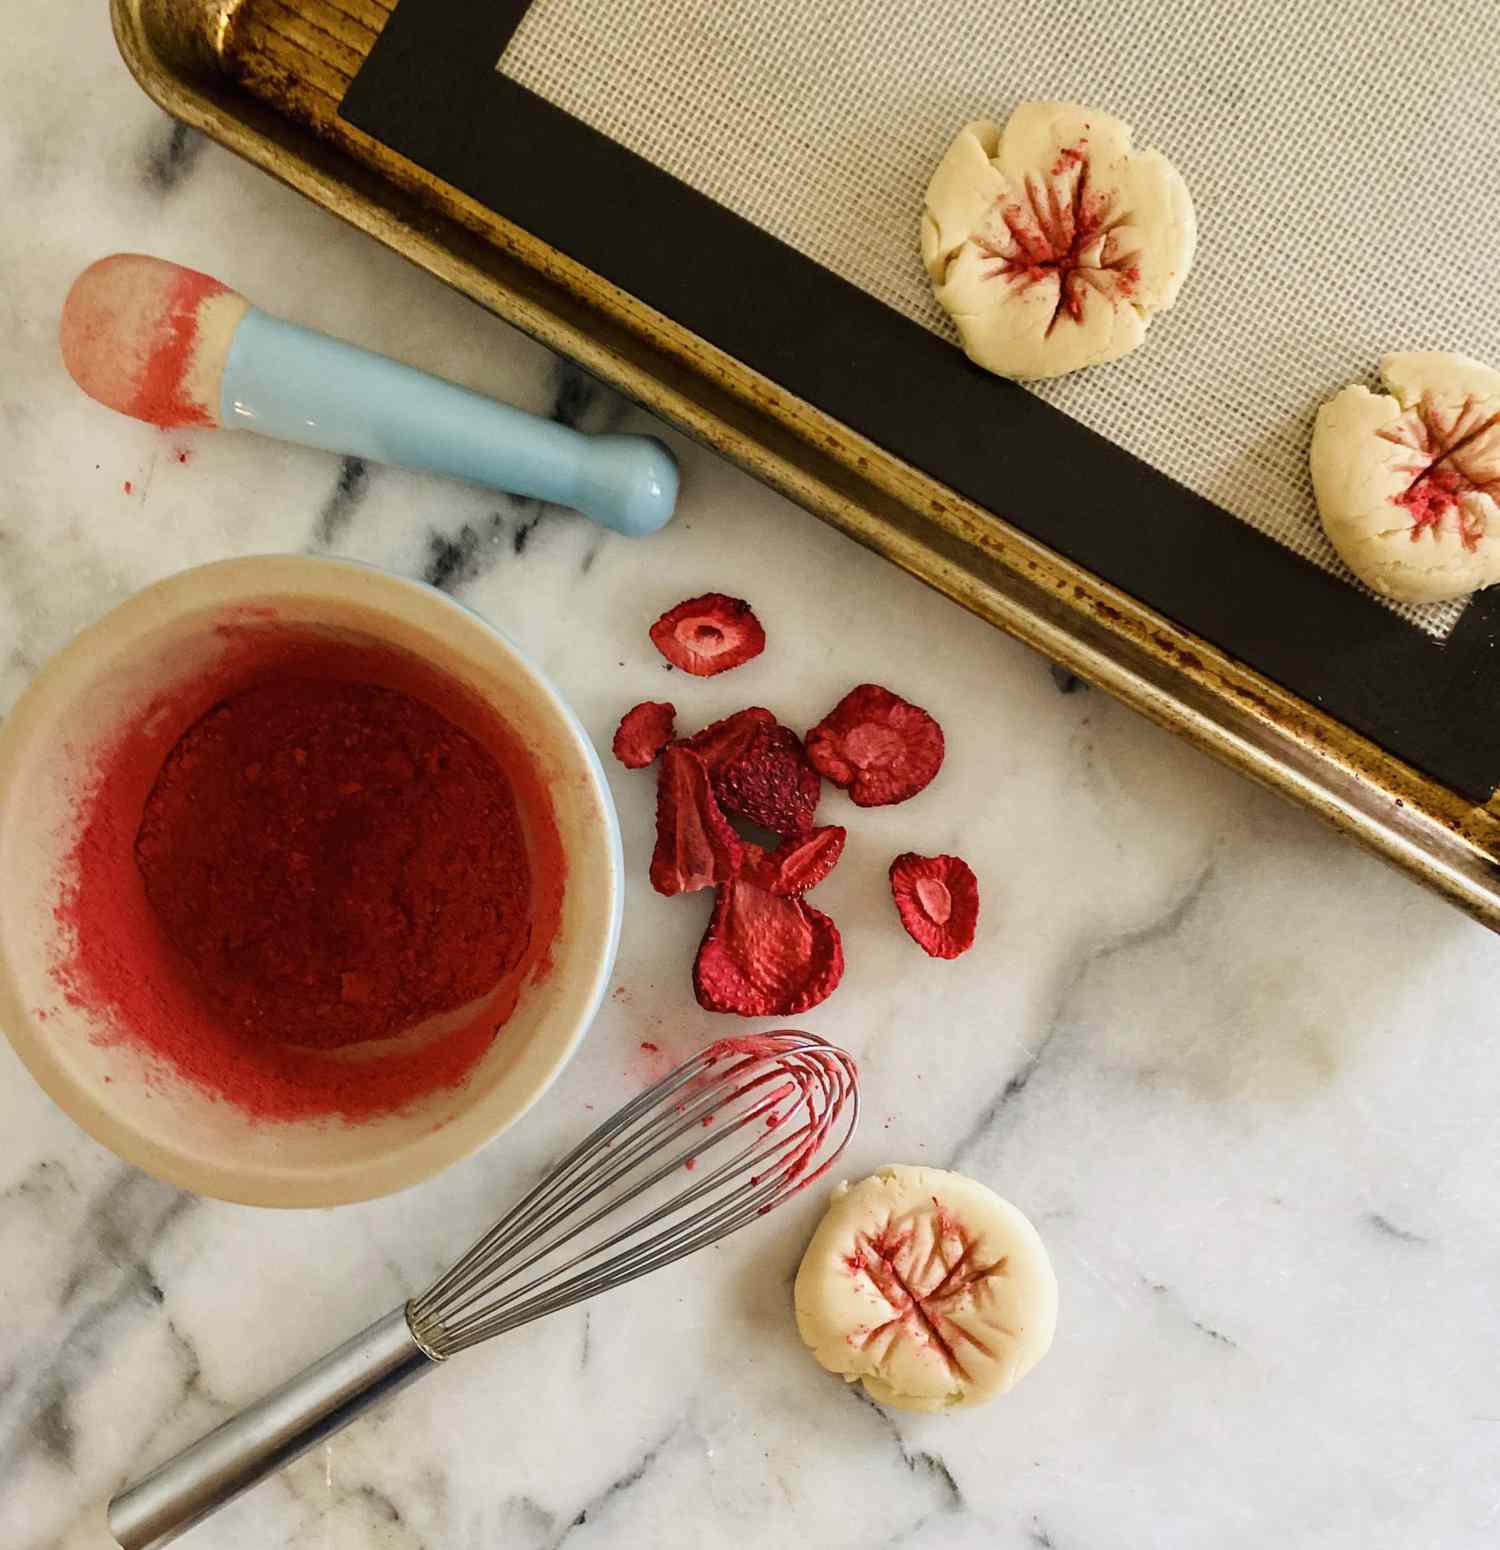 making colored designs in cookie dough with a whisk dipped in freeze-dried strawberries